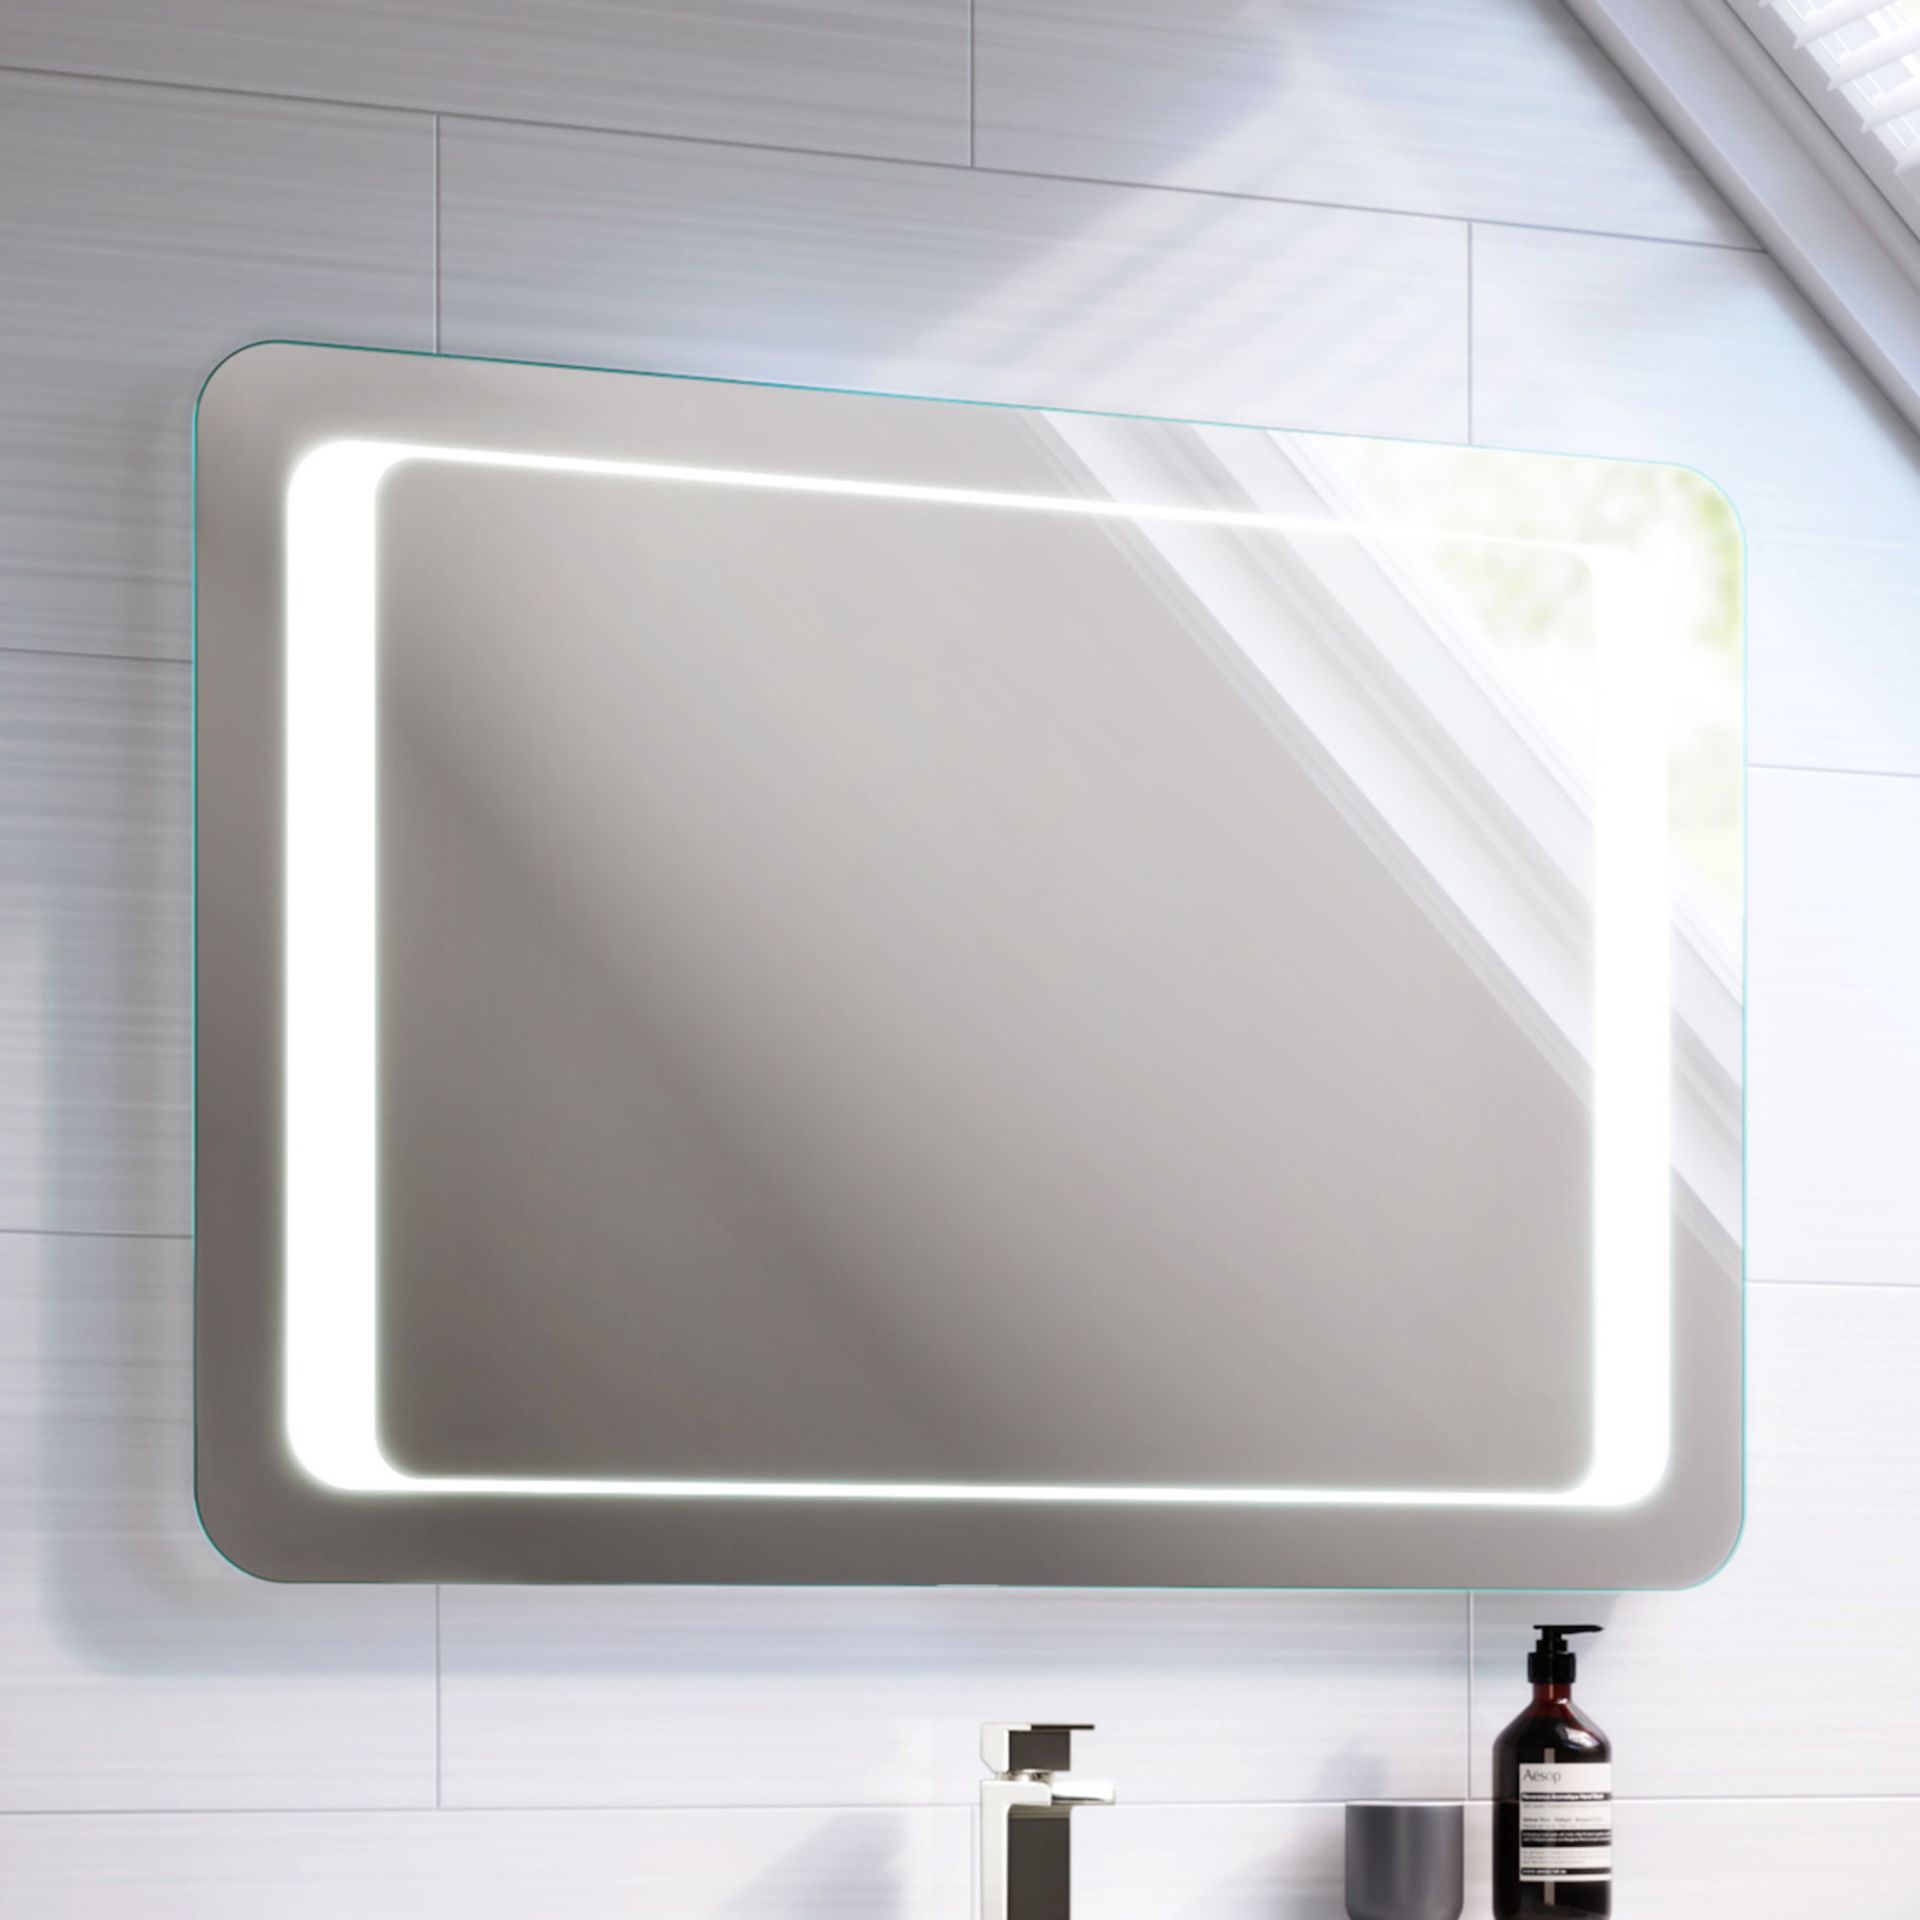 (TY66) 650x900mm Quasar Illuminated LED Mirror. RRP £349.99. Energy efficient LED lighting with IP44